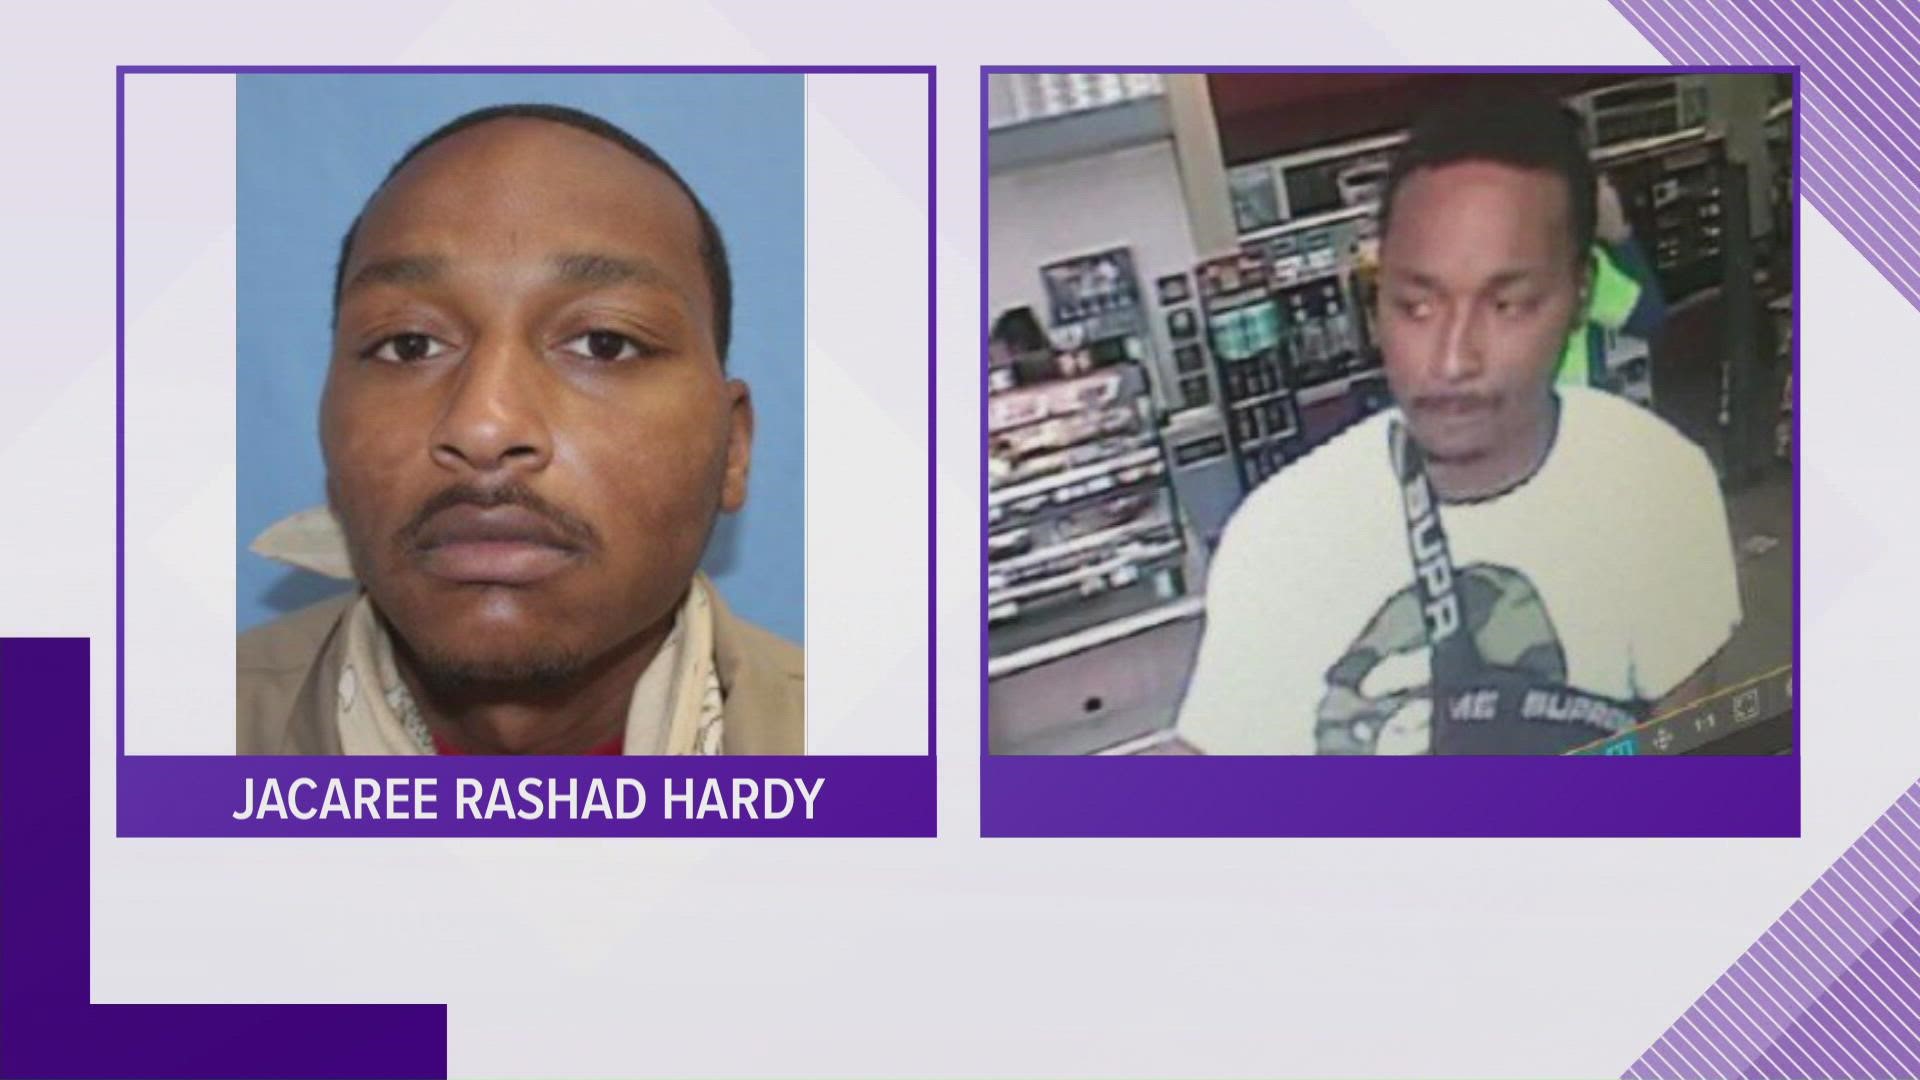 Jacaree Rashad Hardy was wanted for murder in the second degree in the death of a 20-year-old woman.